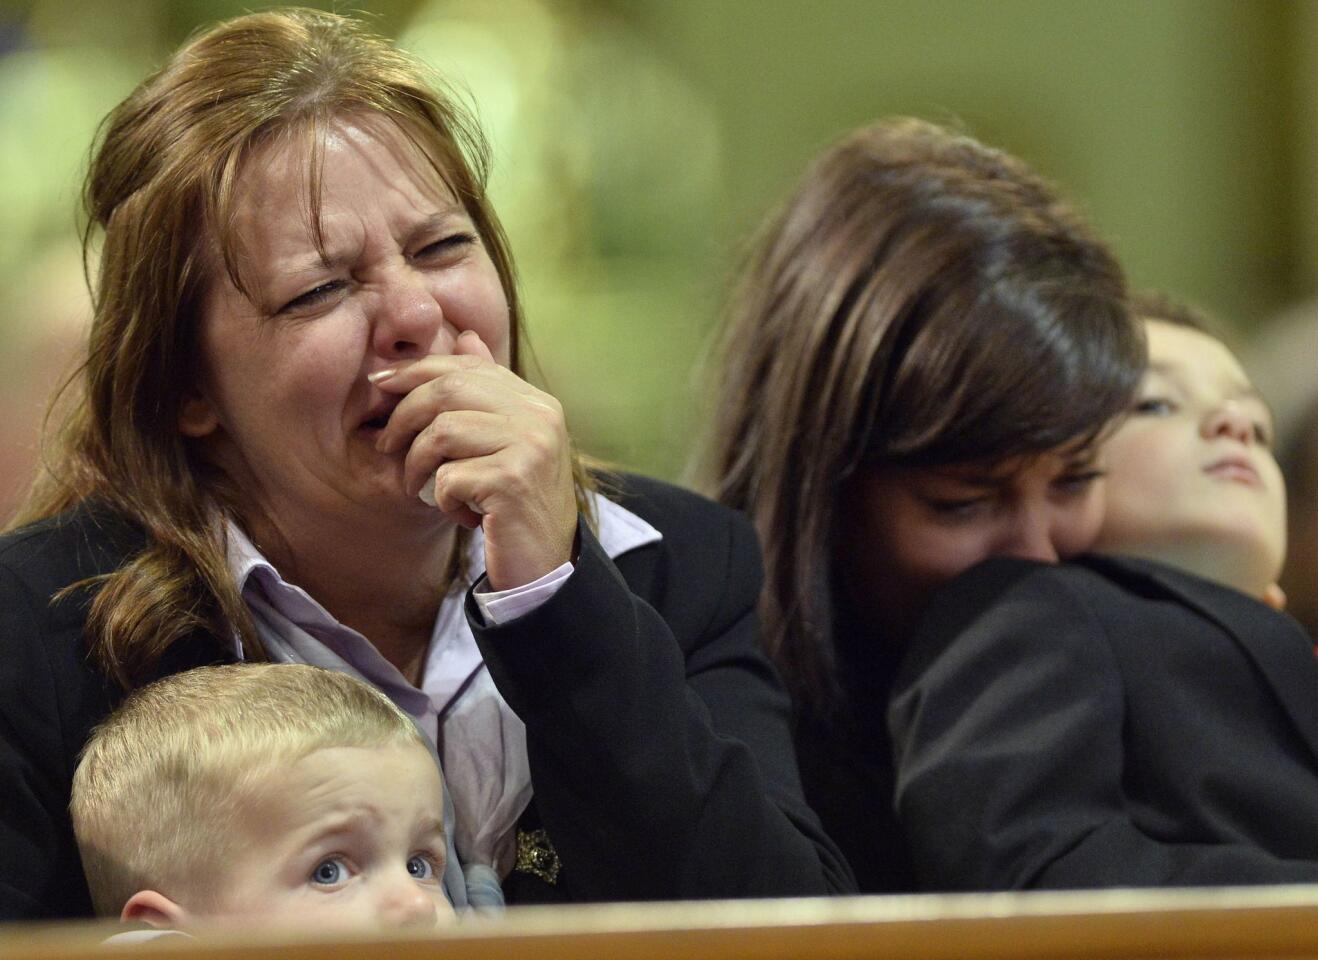 Kathy Cirillo and family attend the regimental funeral service for her son, Cpl. Nathan Cirillo in Hamilton, Ontario